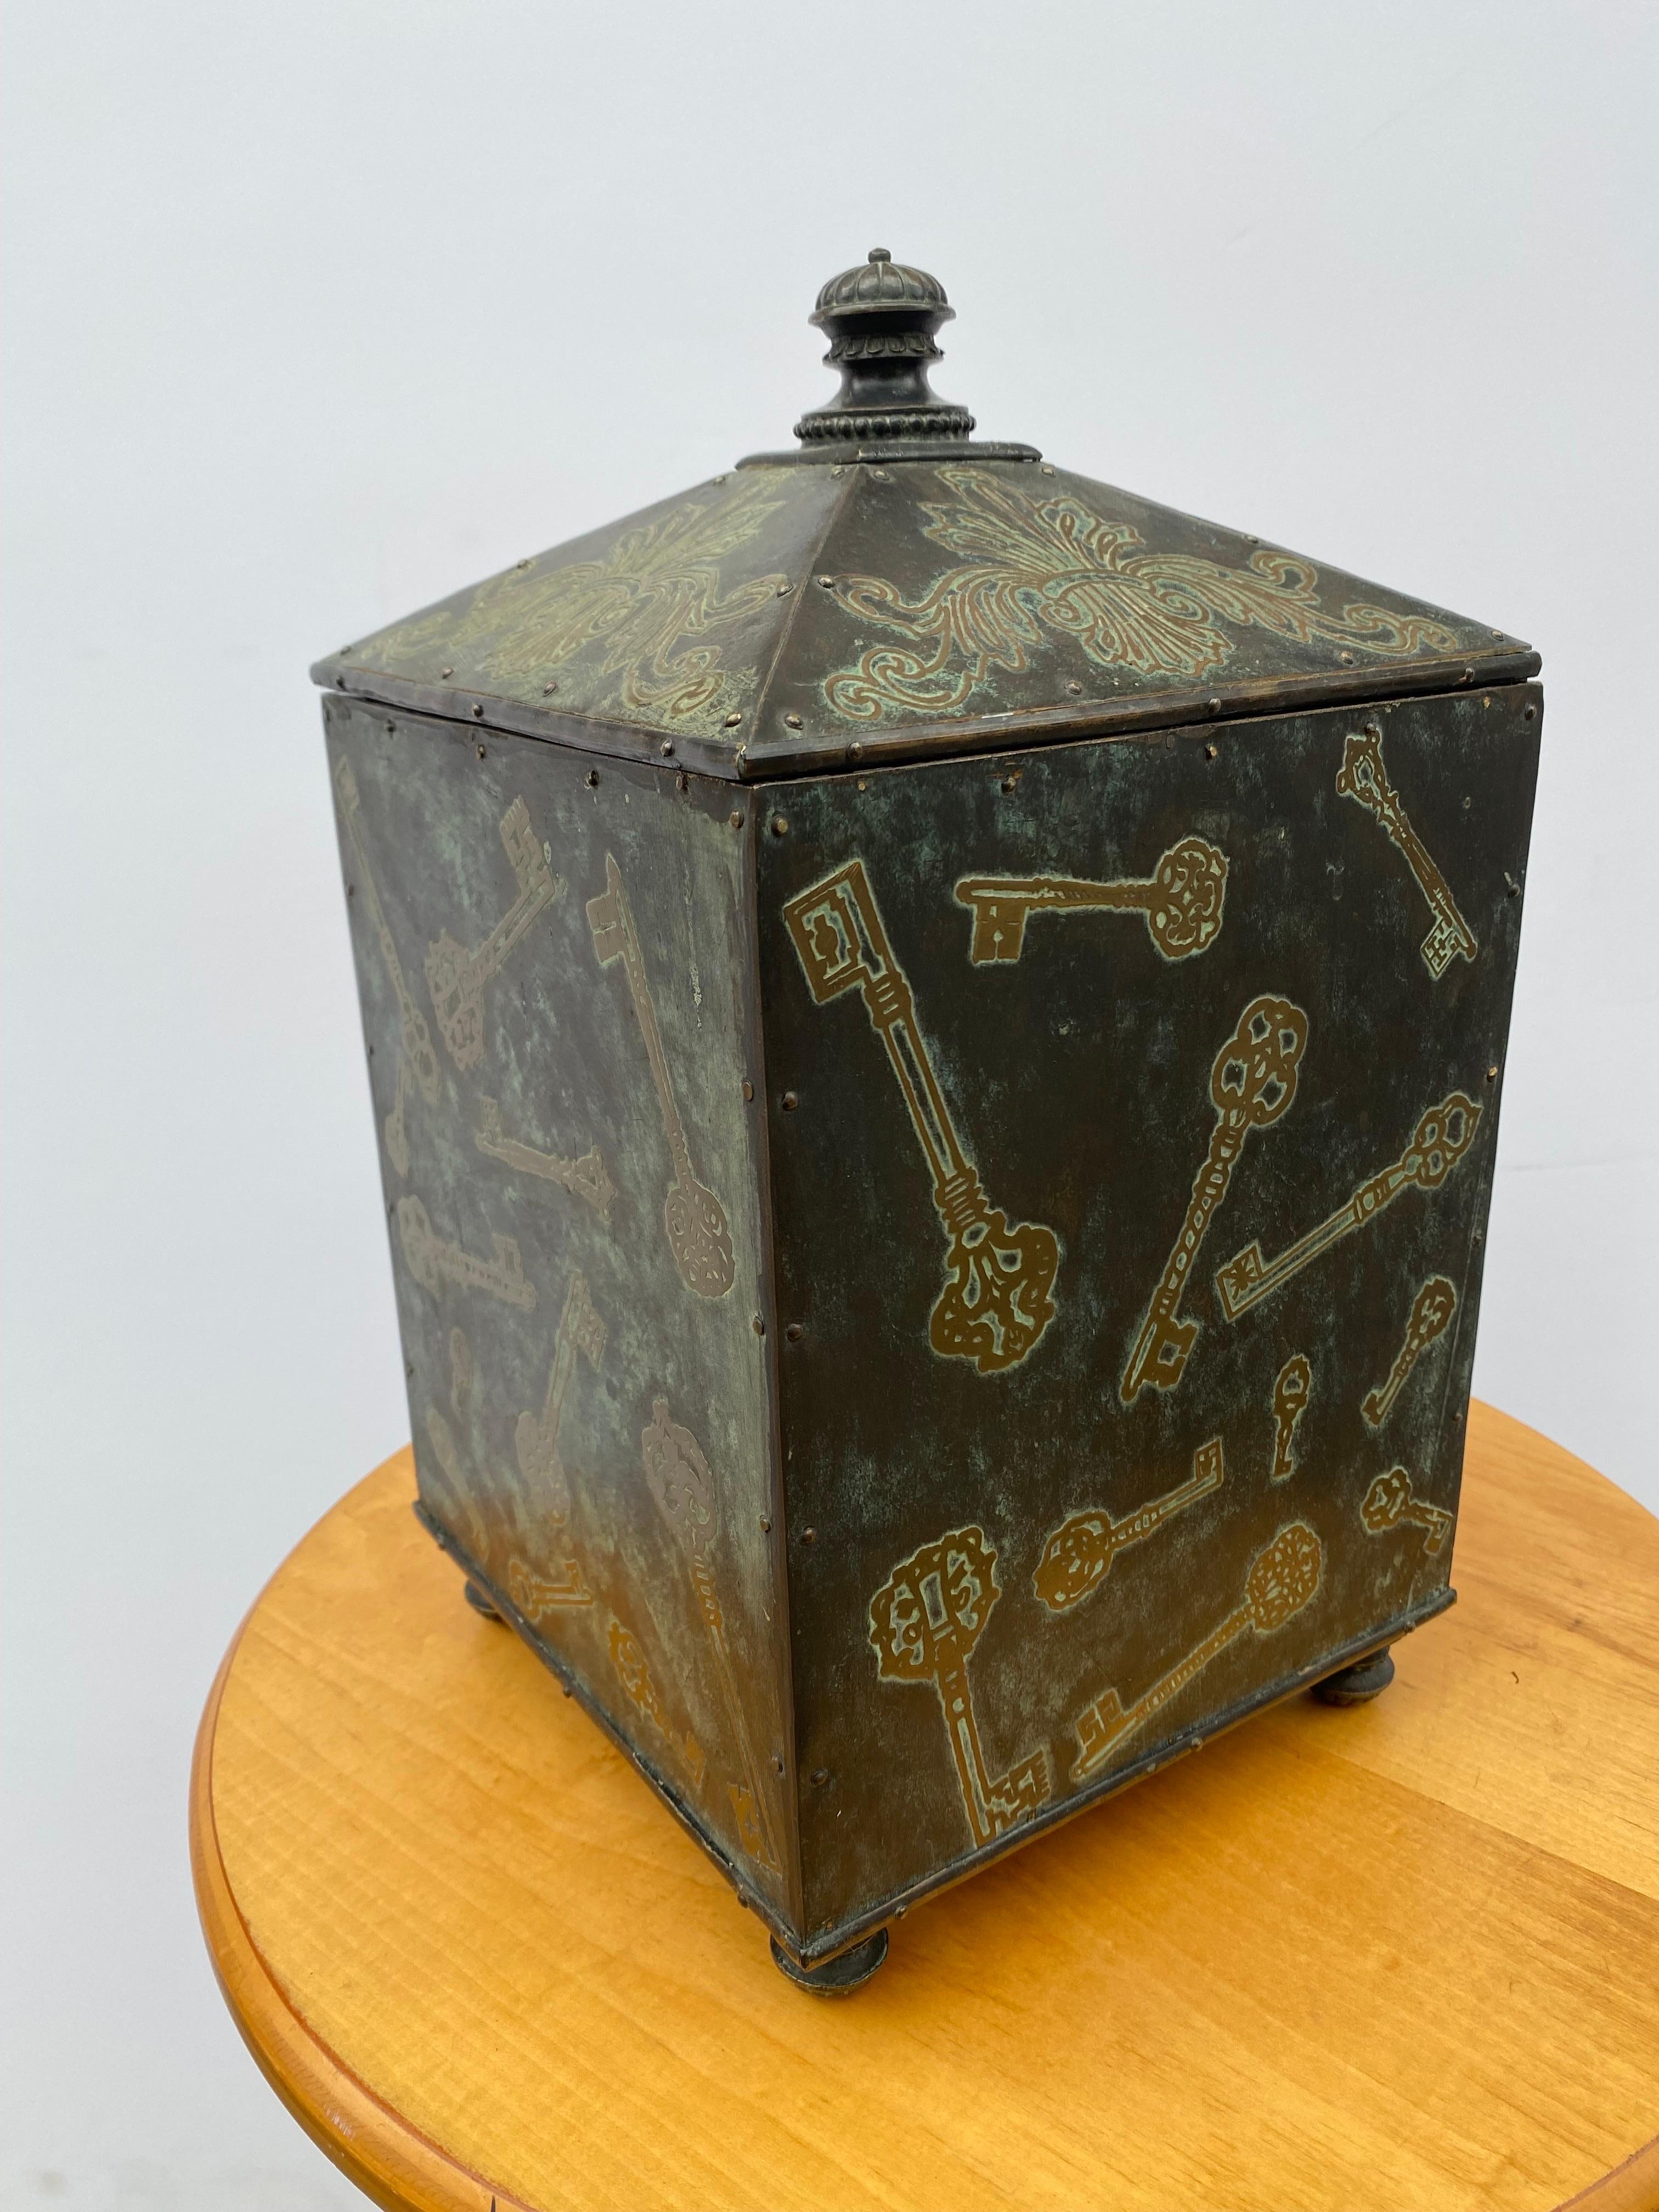 Maitland Smith lidded box. Key design on 4 sides with a peaked lid. Very nicely done. Whimsical 
Design that has a functional use!